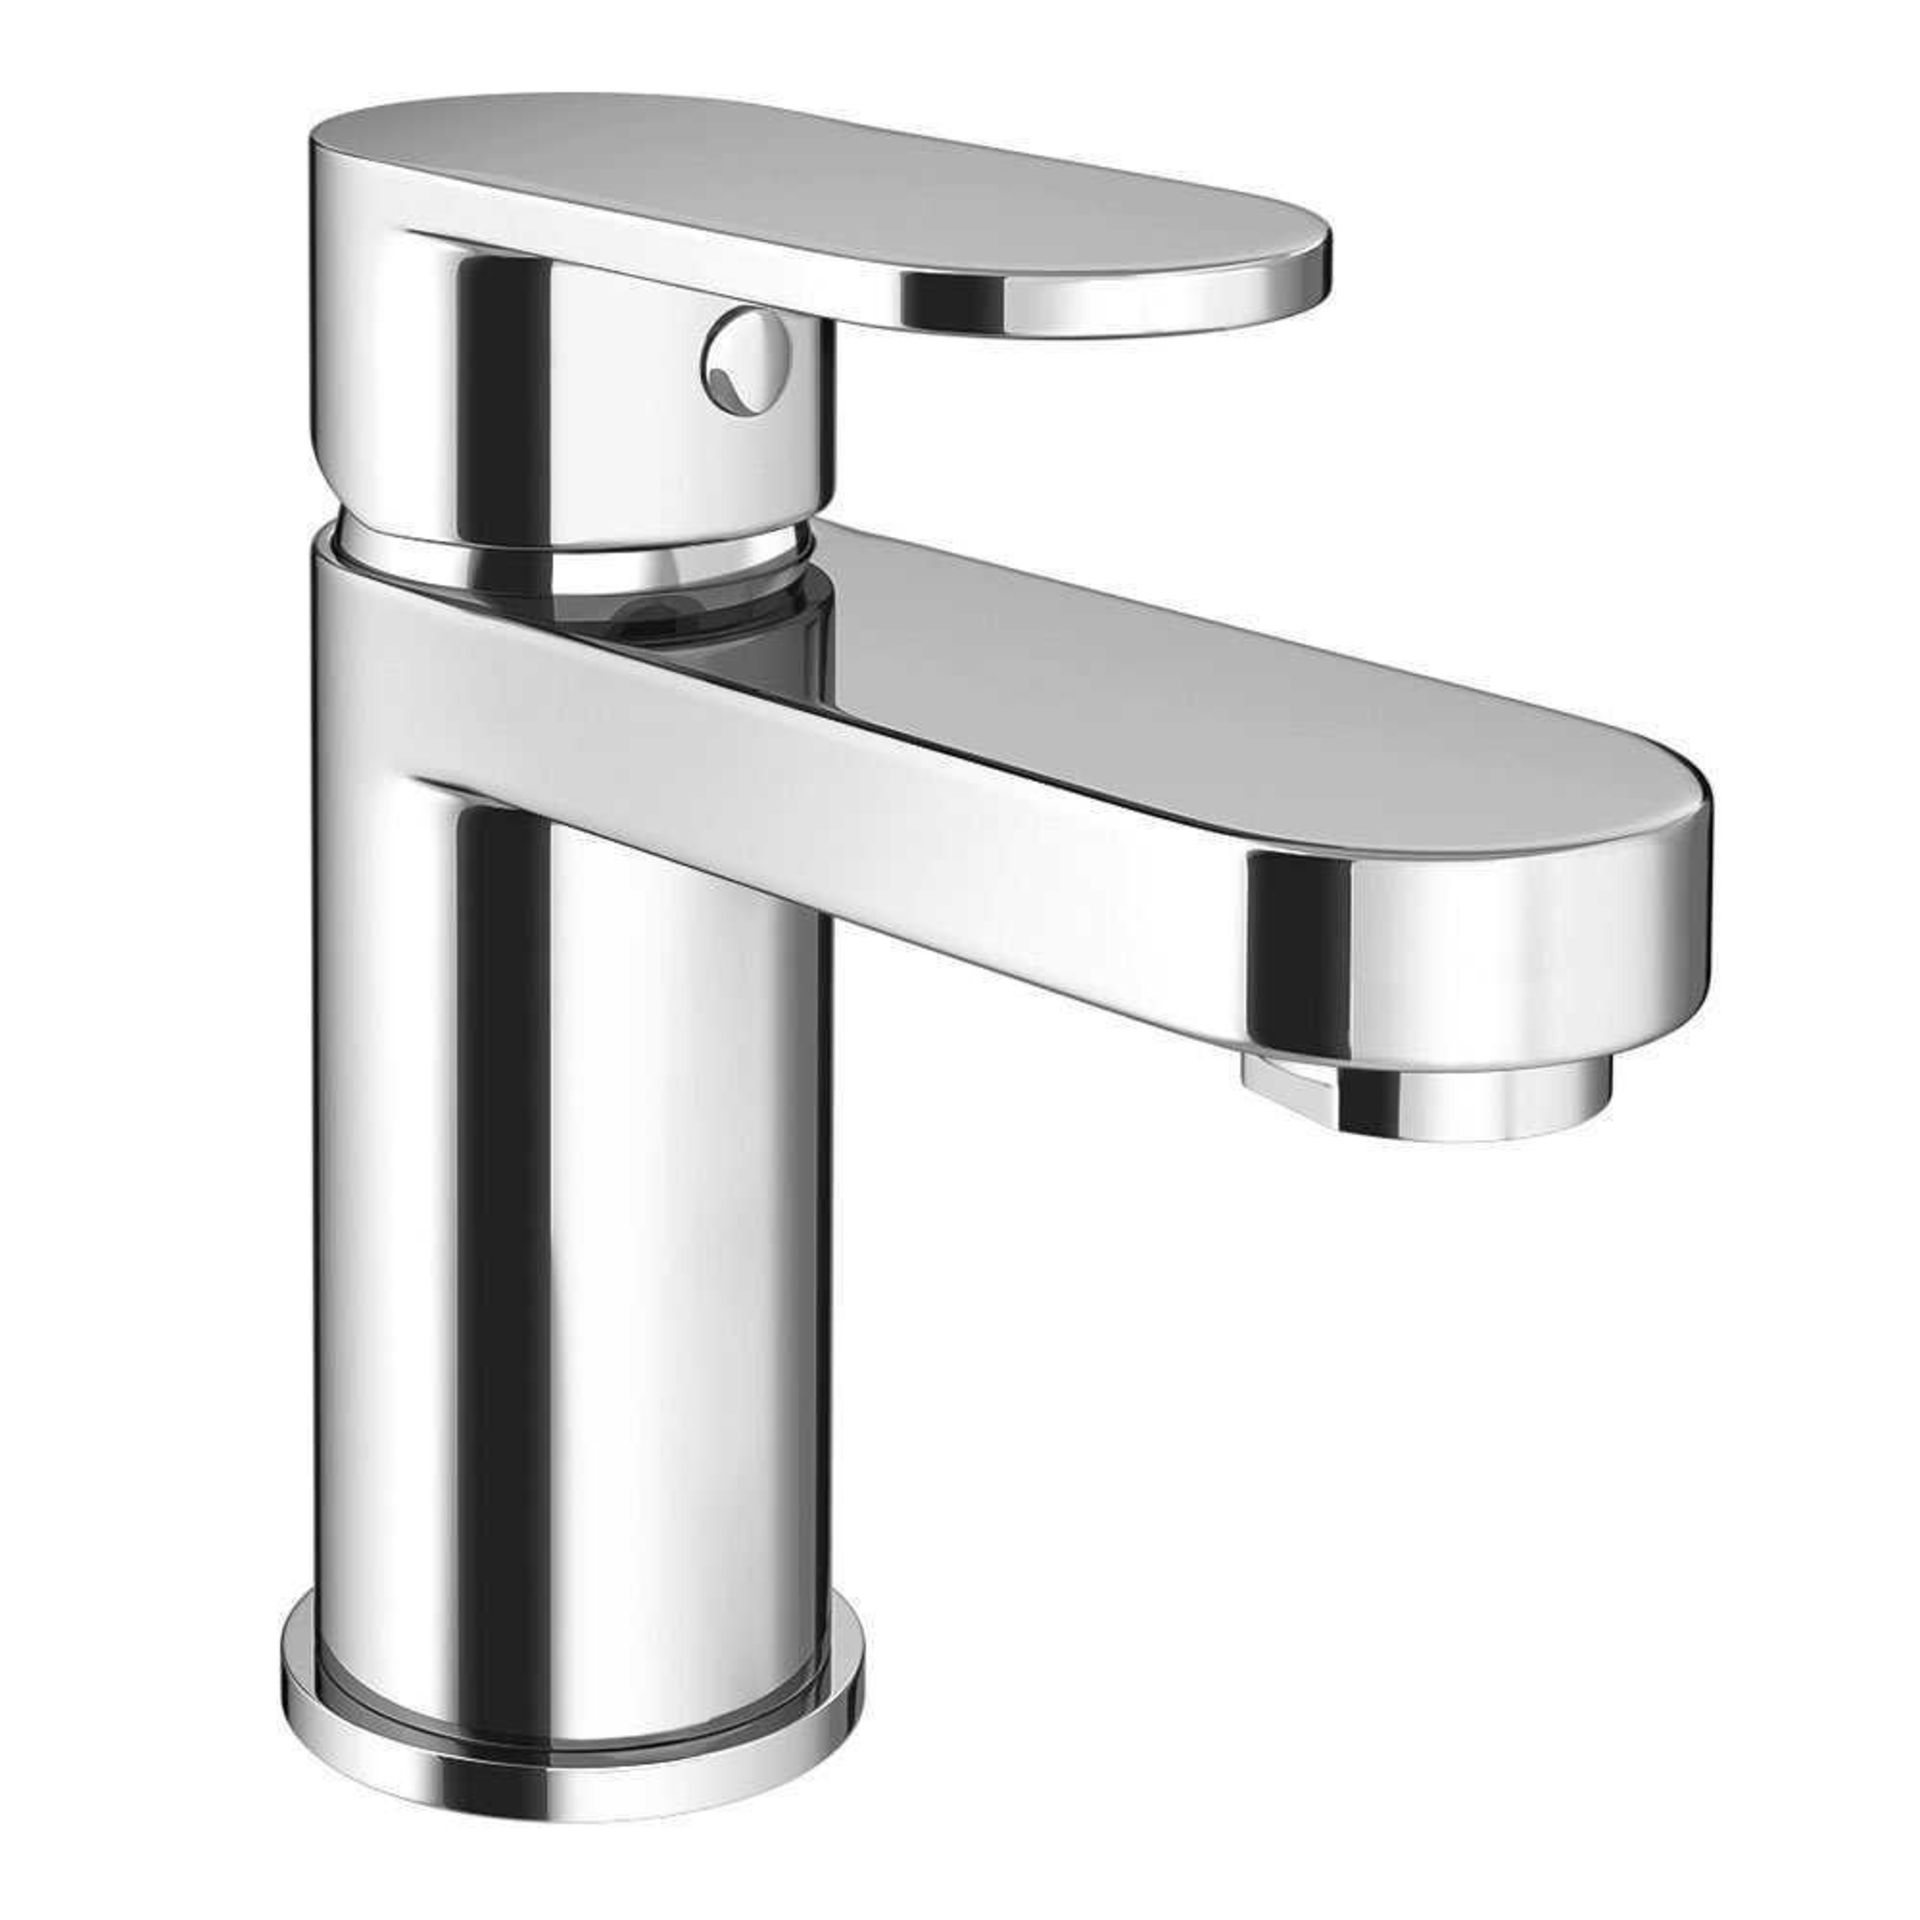 (Jb) RRP £160 Lot To Contain 1 Boxed Chrome Bathroom Mixer Tap 1293593C